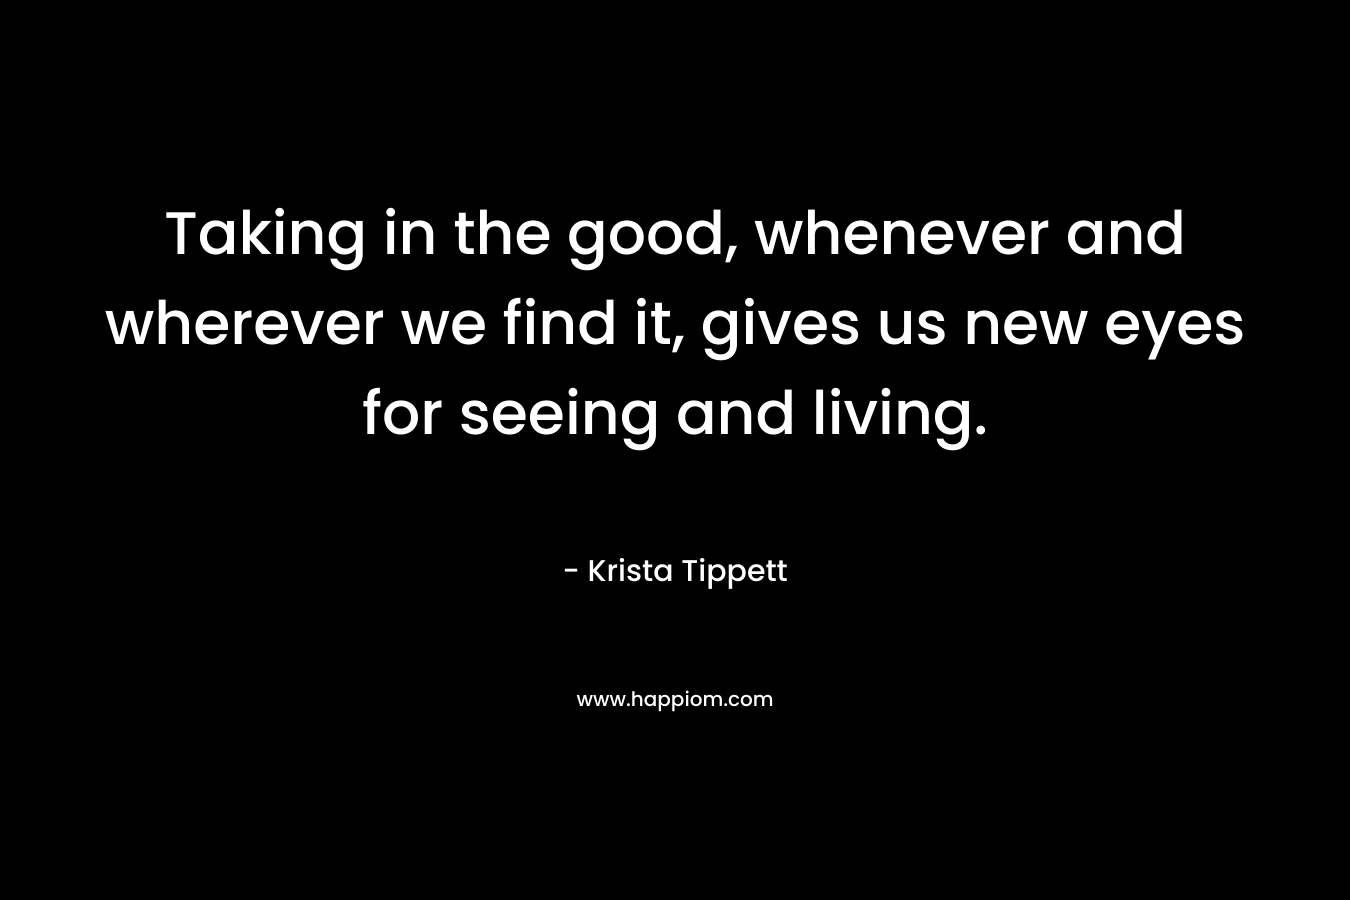 Taking in the good, whenever and wherever we find it, gives us new eyes for seeing and living.